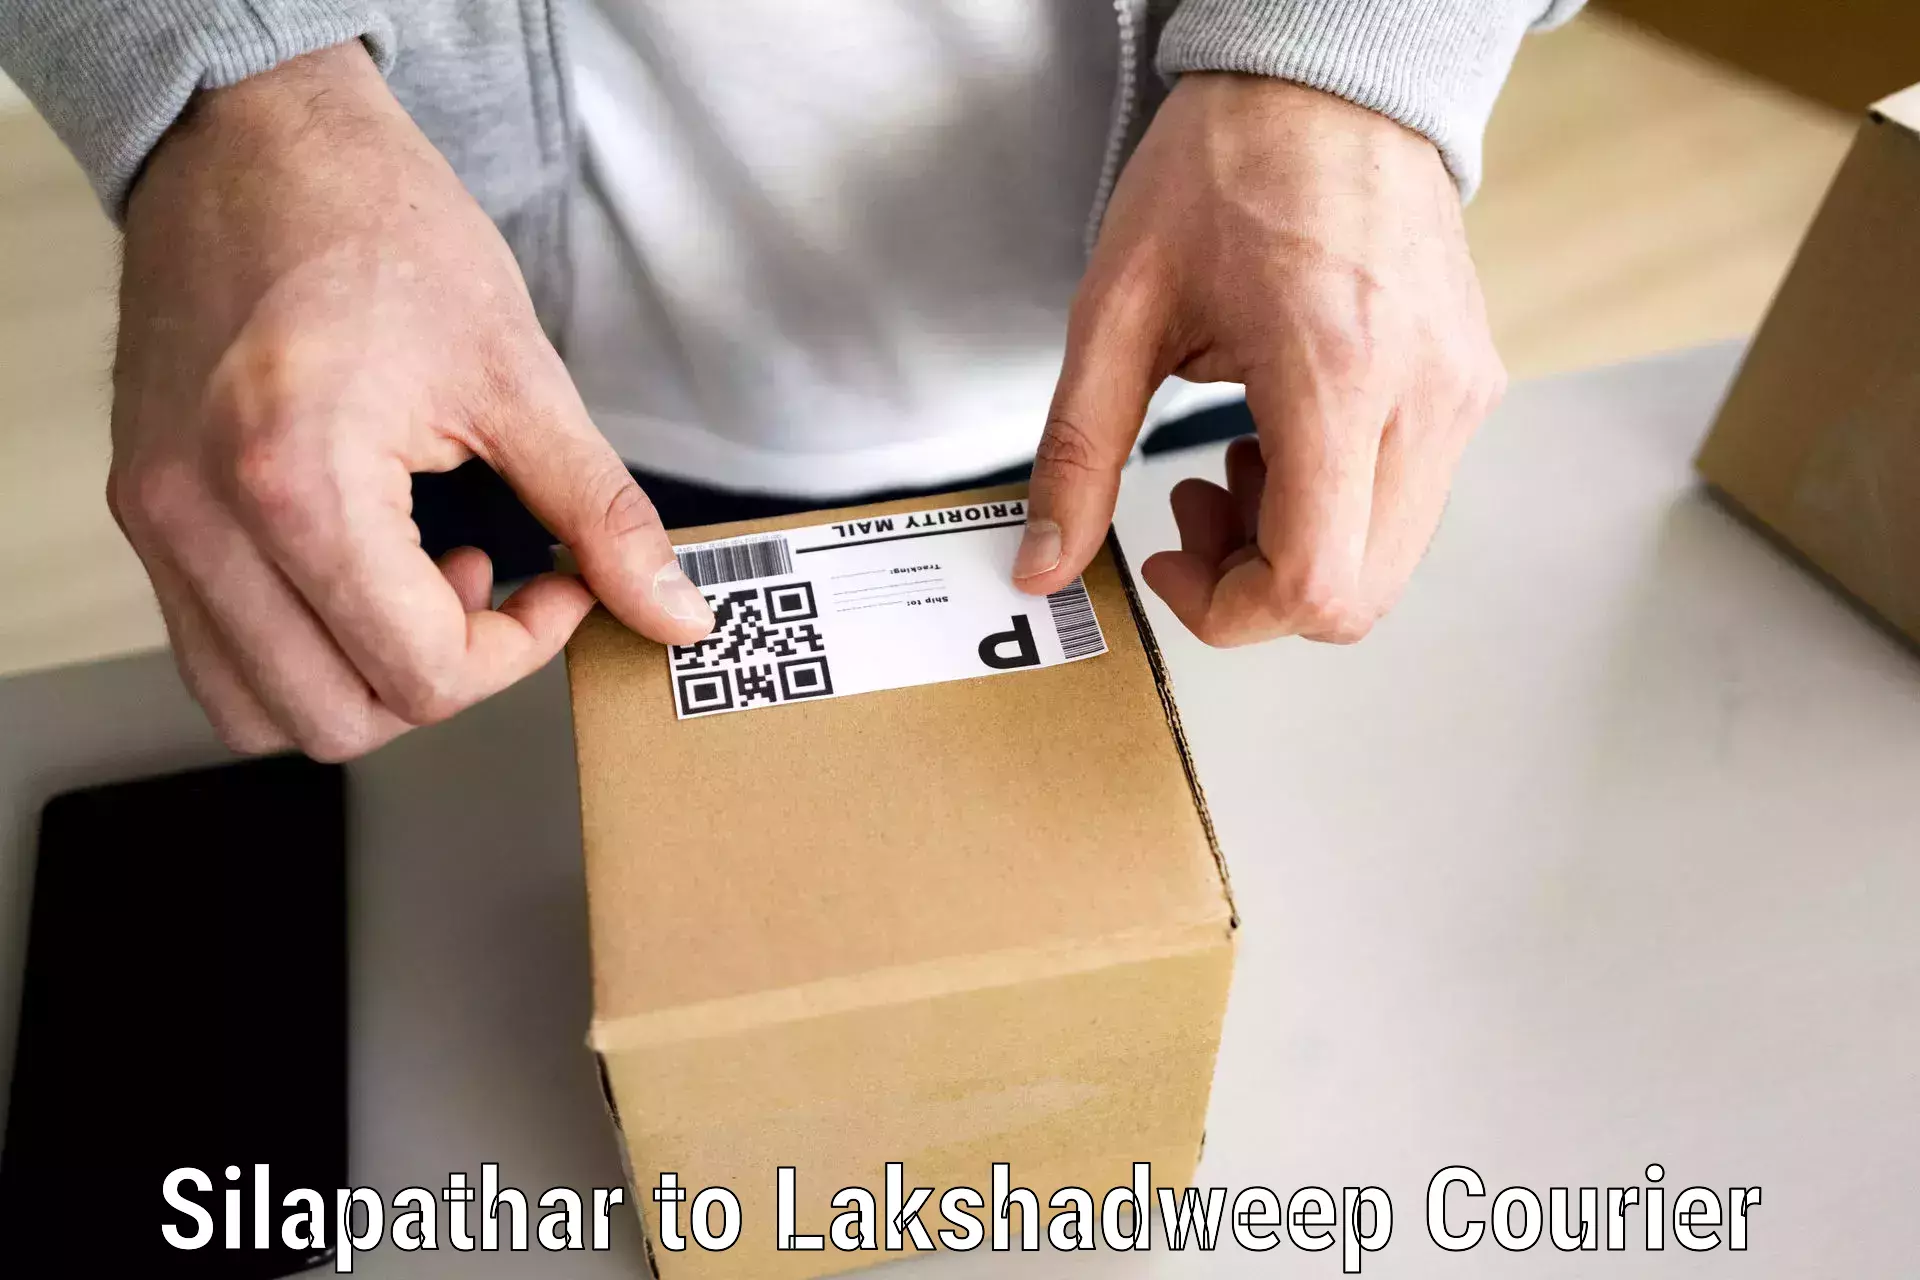 Furniture delivery service Silapathar to Lakshadweep